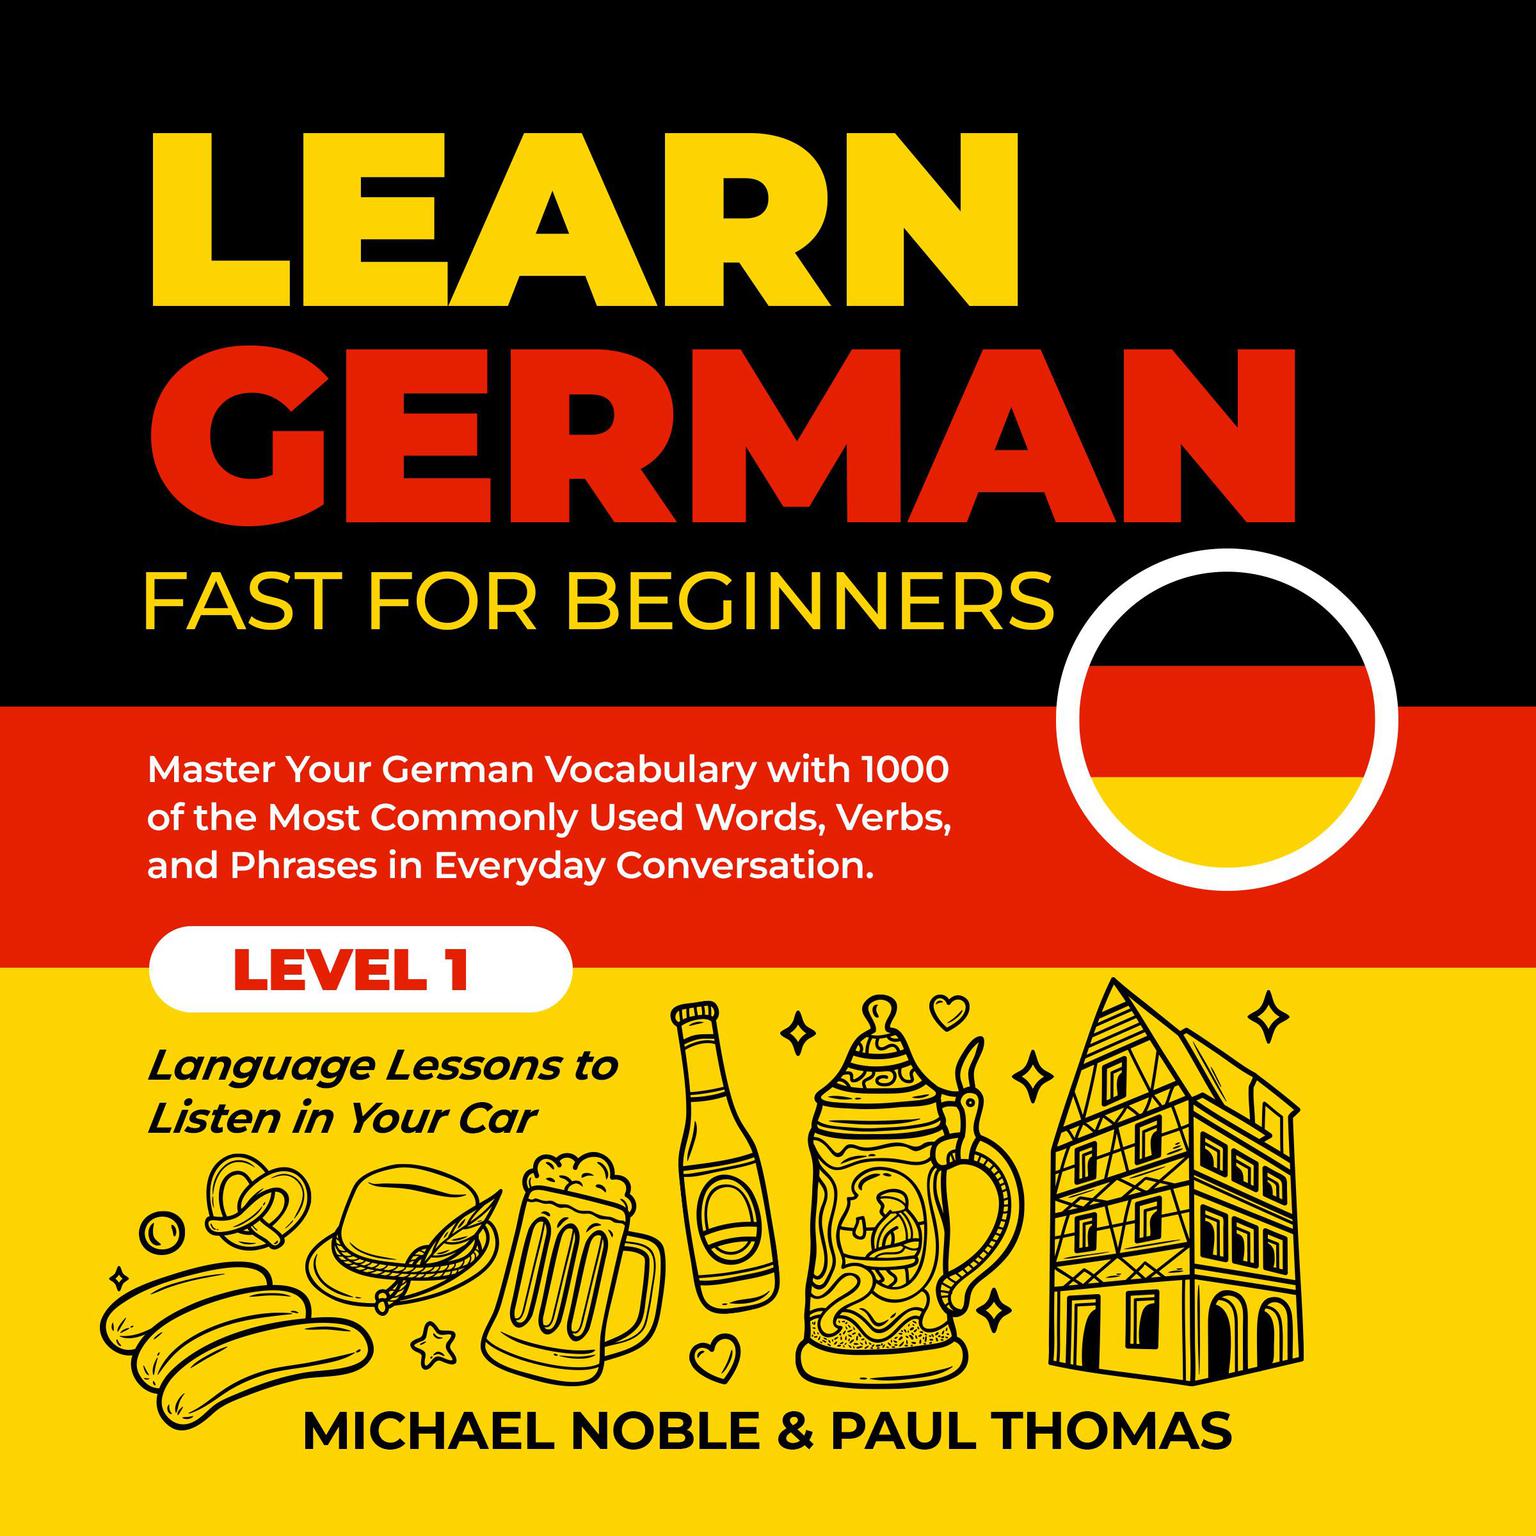 Learn German Fast for Beginners: Master Your German Vocabulary with 1000 of the Most Commonly Used Words, Verbs and Phrases in Everyday Conversation. Level 1 Language Lessons to Listen in Your Car Audiobook, by Paul Thomas